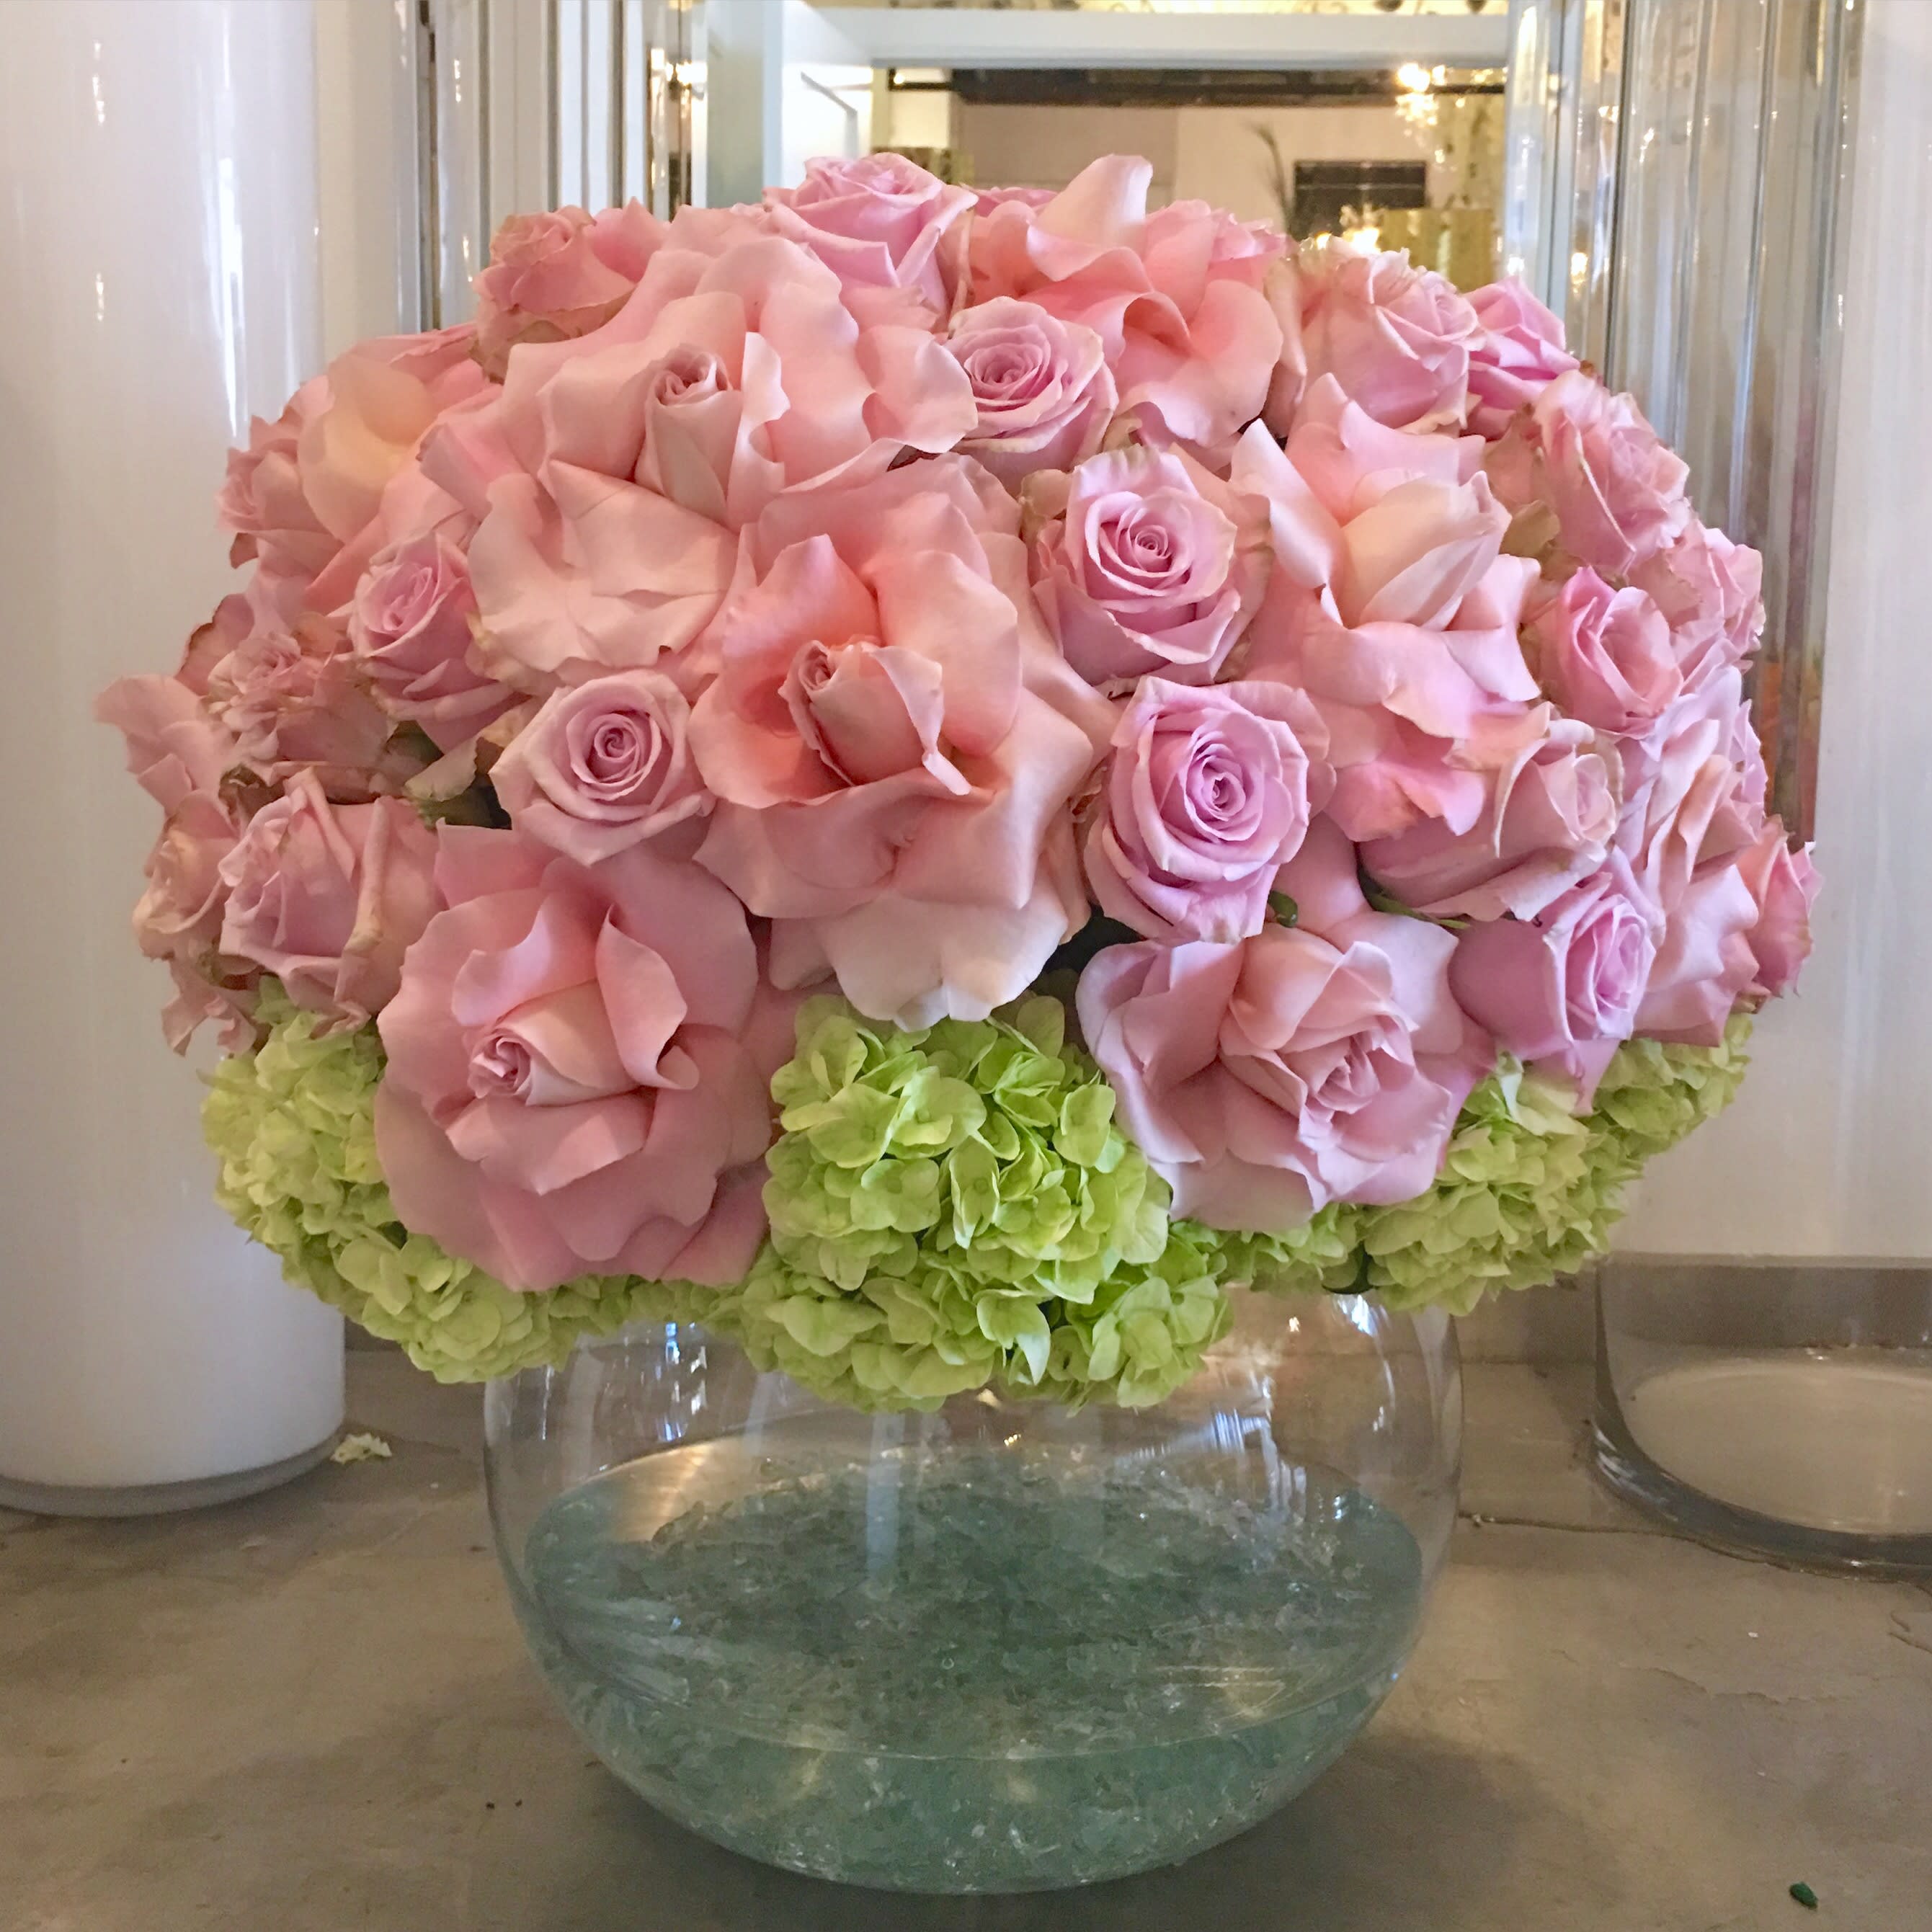 Soft Touch of Love - A large ball of soft pastel pink roses and green hydrangea on a big glass bubble bowl is the perfect expression of love and spring.